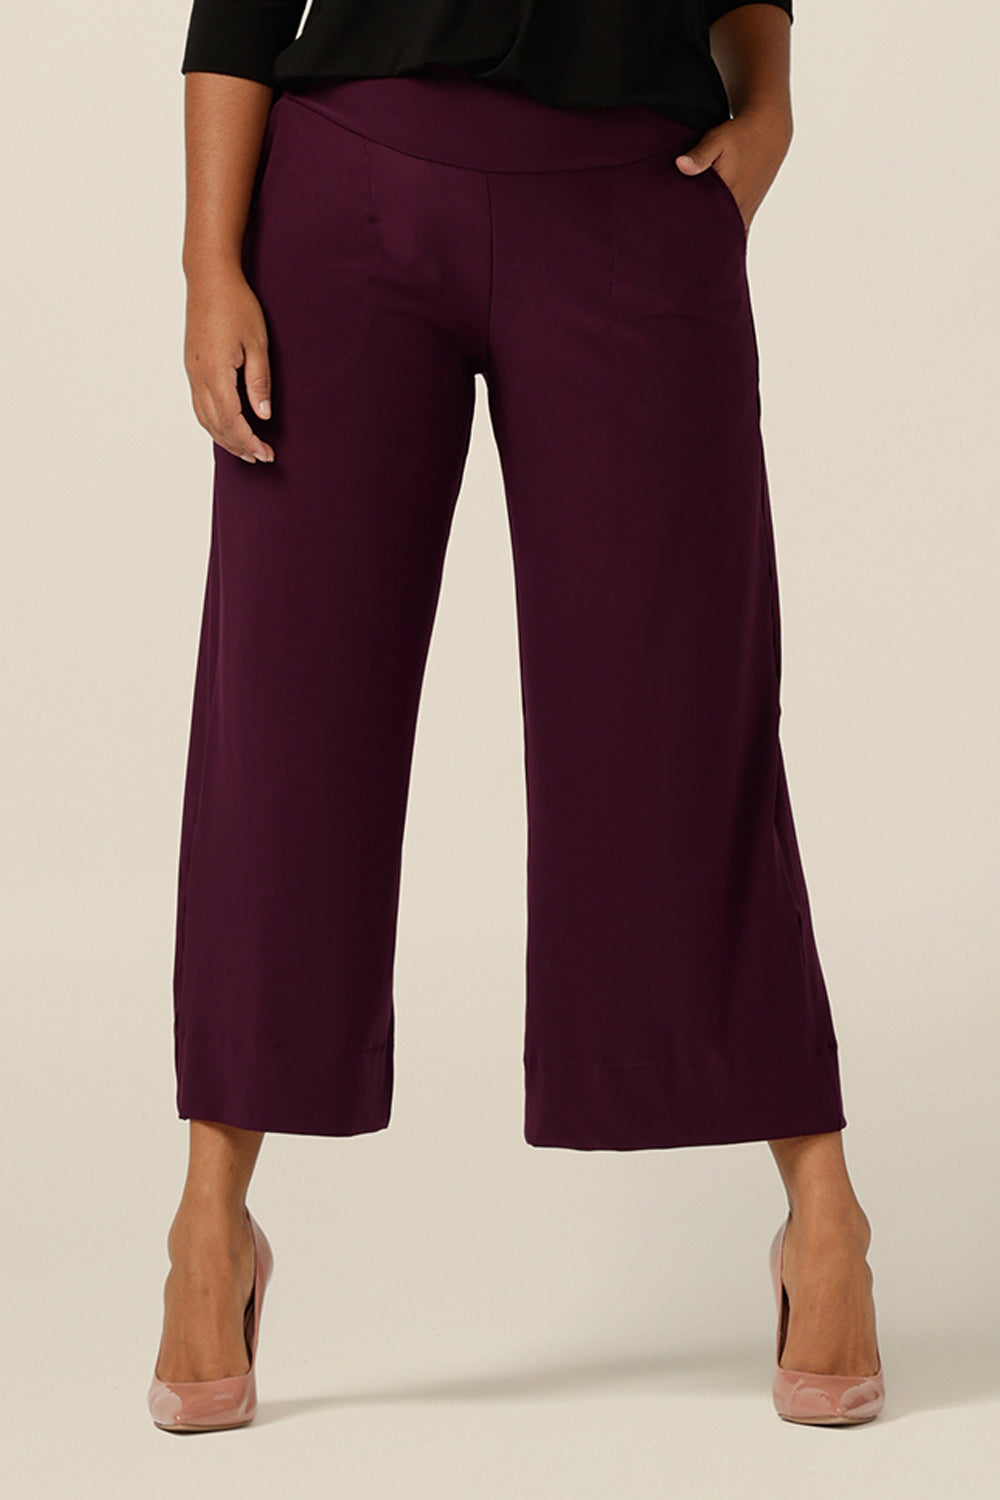 Shop wide leg workwear pants like these culotte-style trousers by Australian women's clothing label, L&F. These cropped length pants are stylish with side pockets and deep waistband. In stretch jersey, they are comfortable and easy-fitting for wearable work wear style.